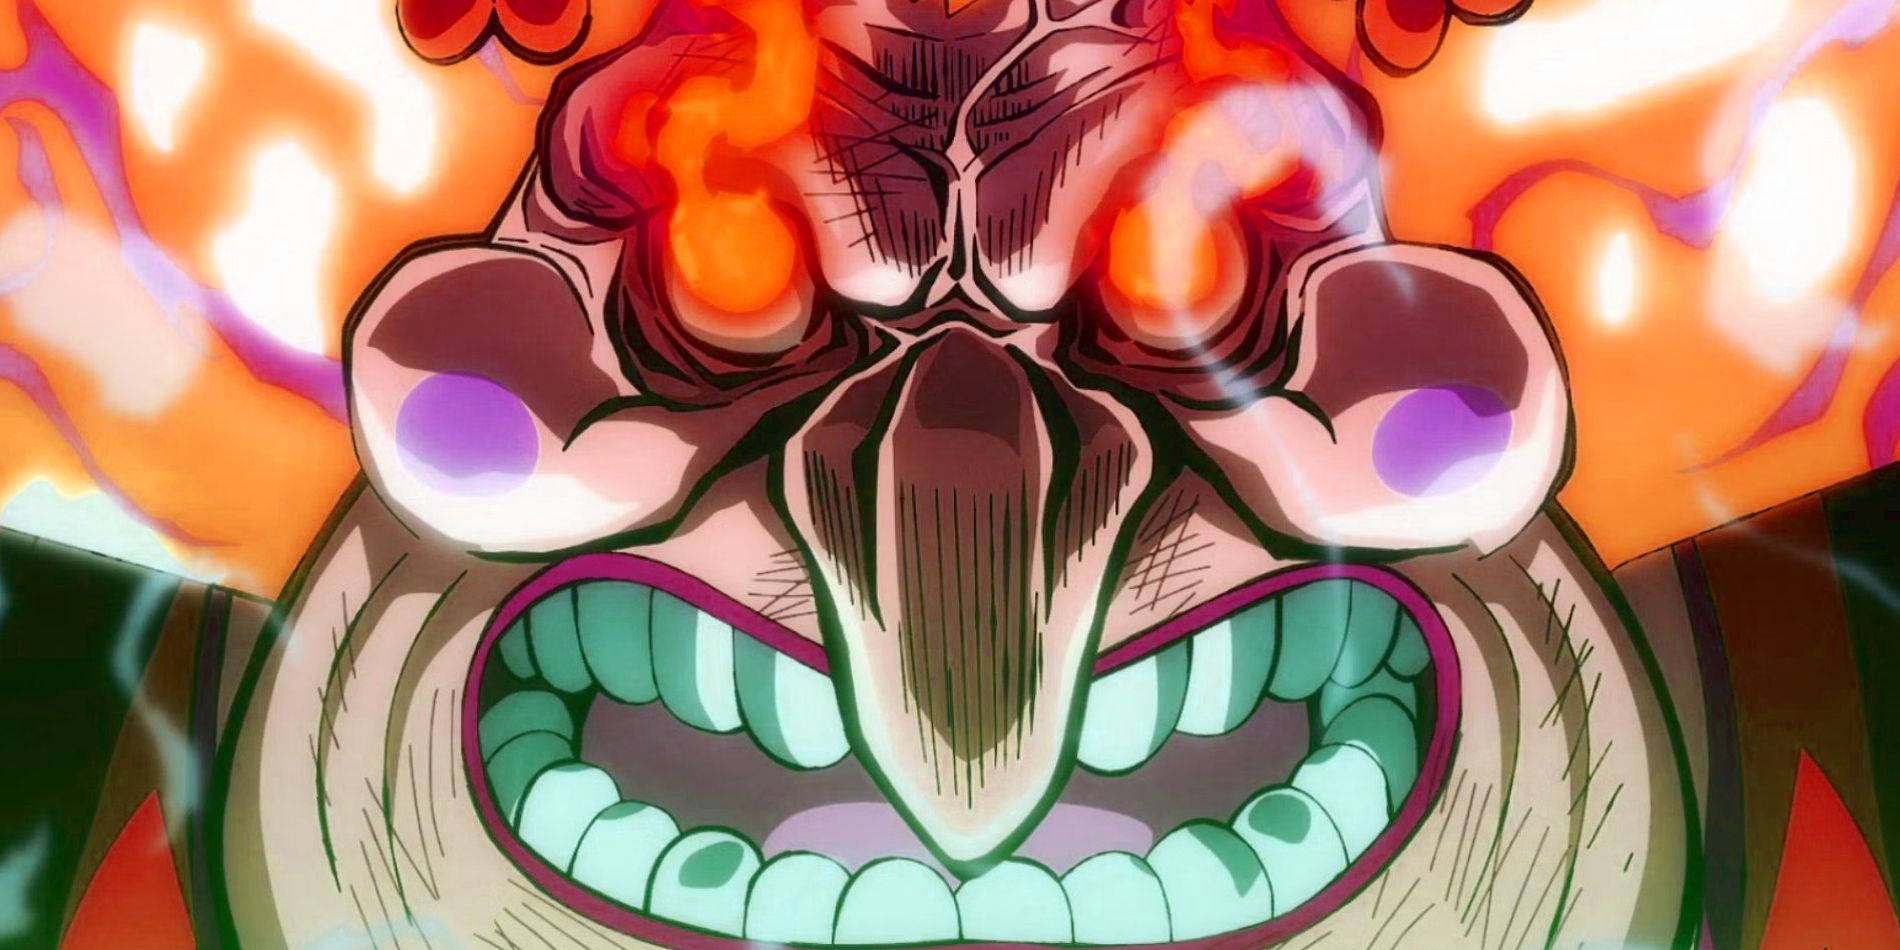 Screenshot from One Piece anime shows Big Mom powered up with firey red eyes and orange flames from hair. The close up of her face is lit by a green aura from the bottom.